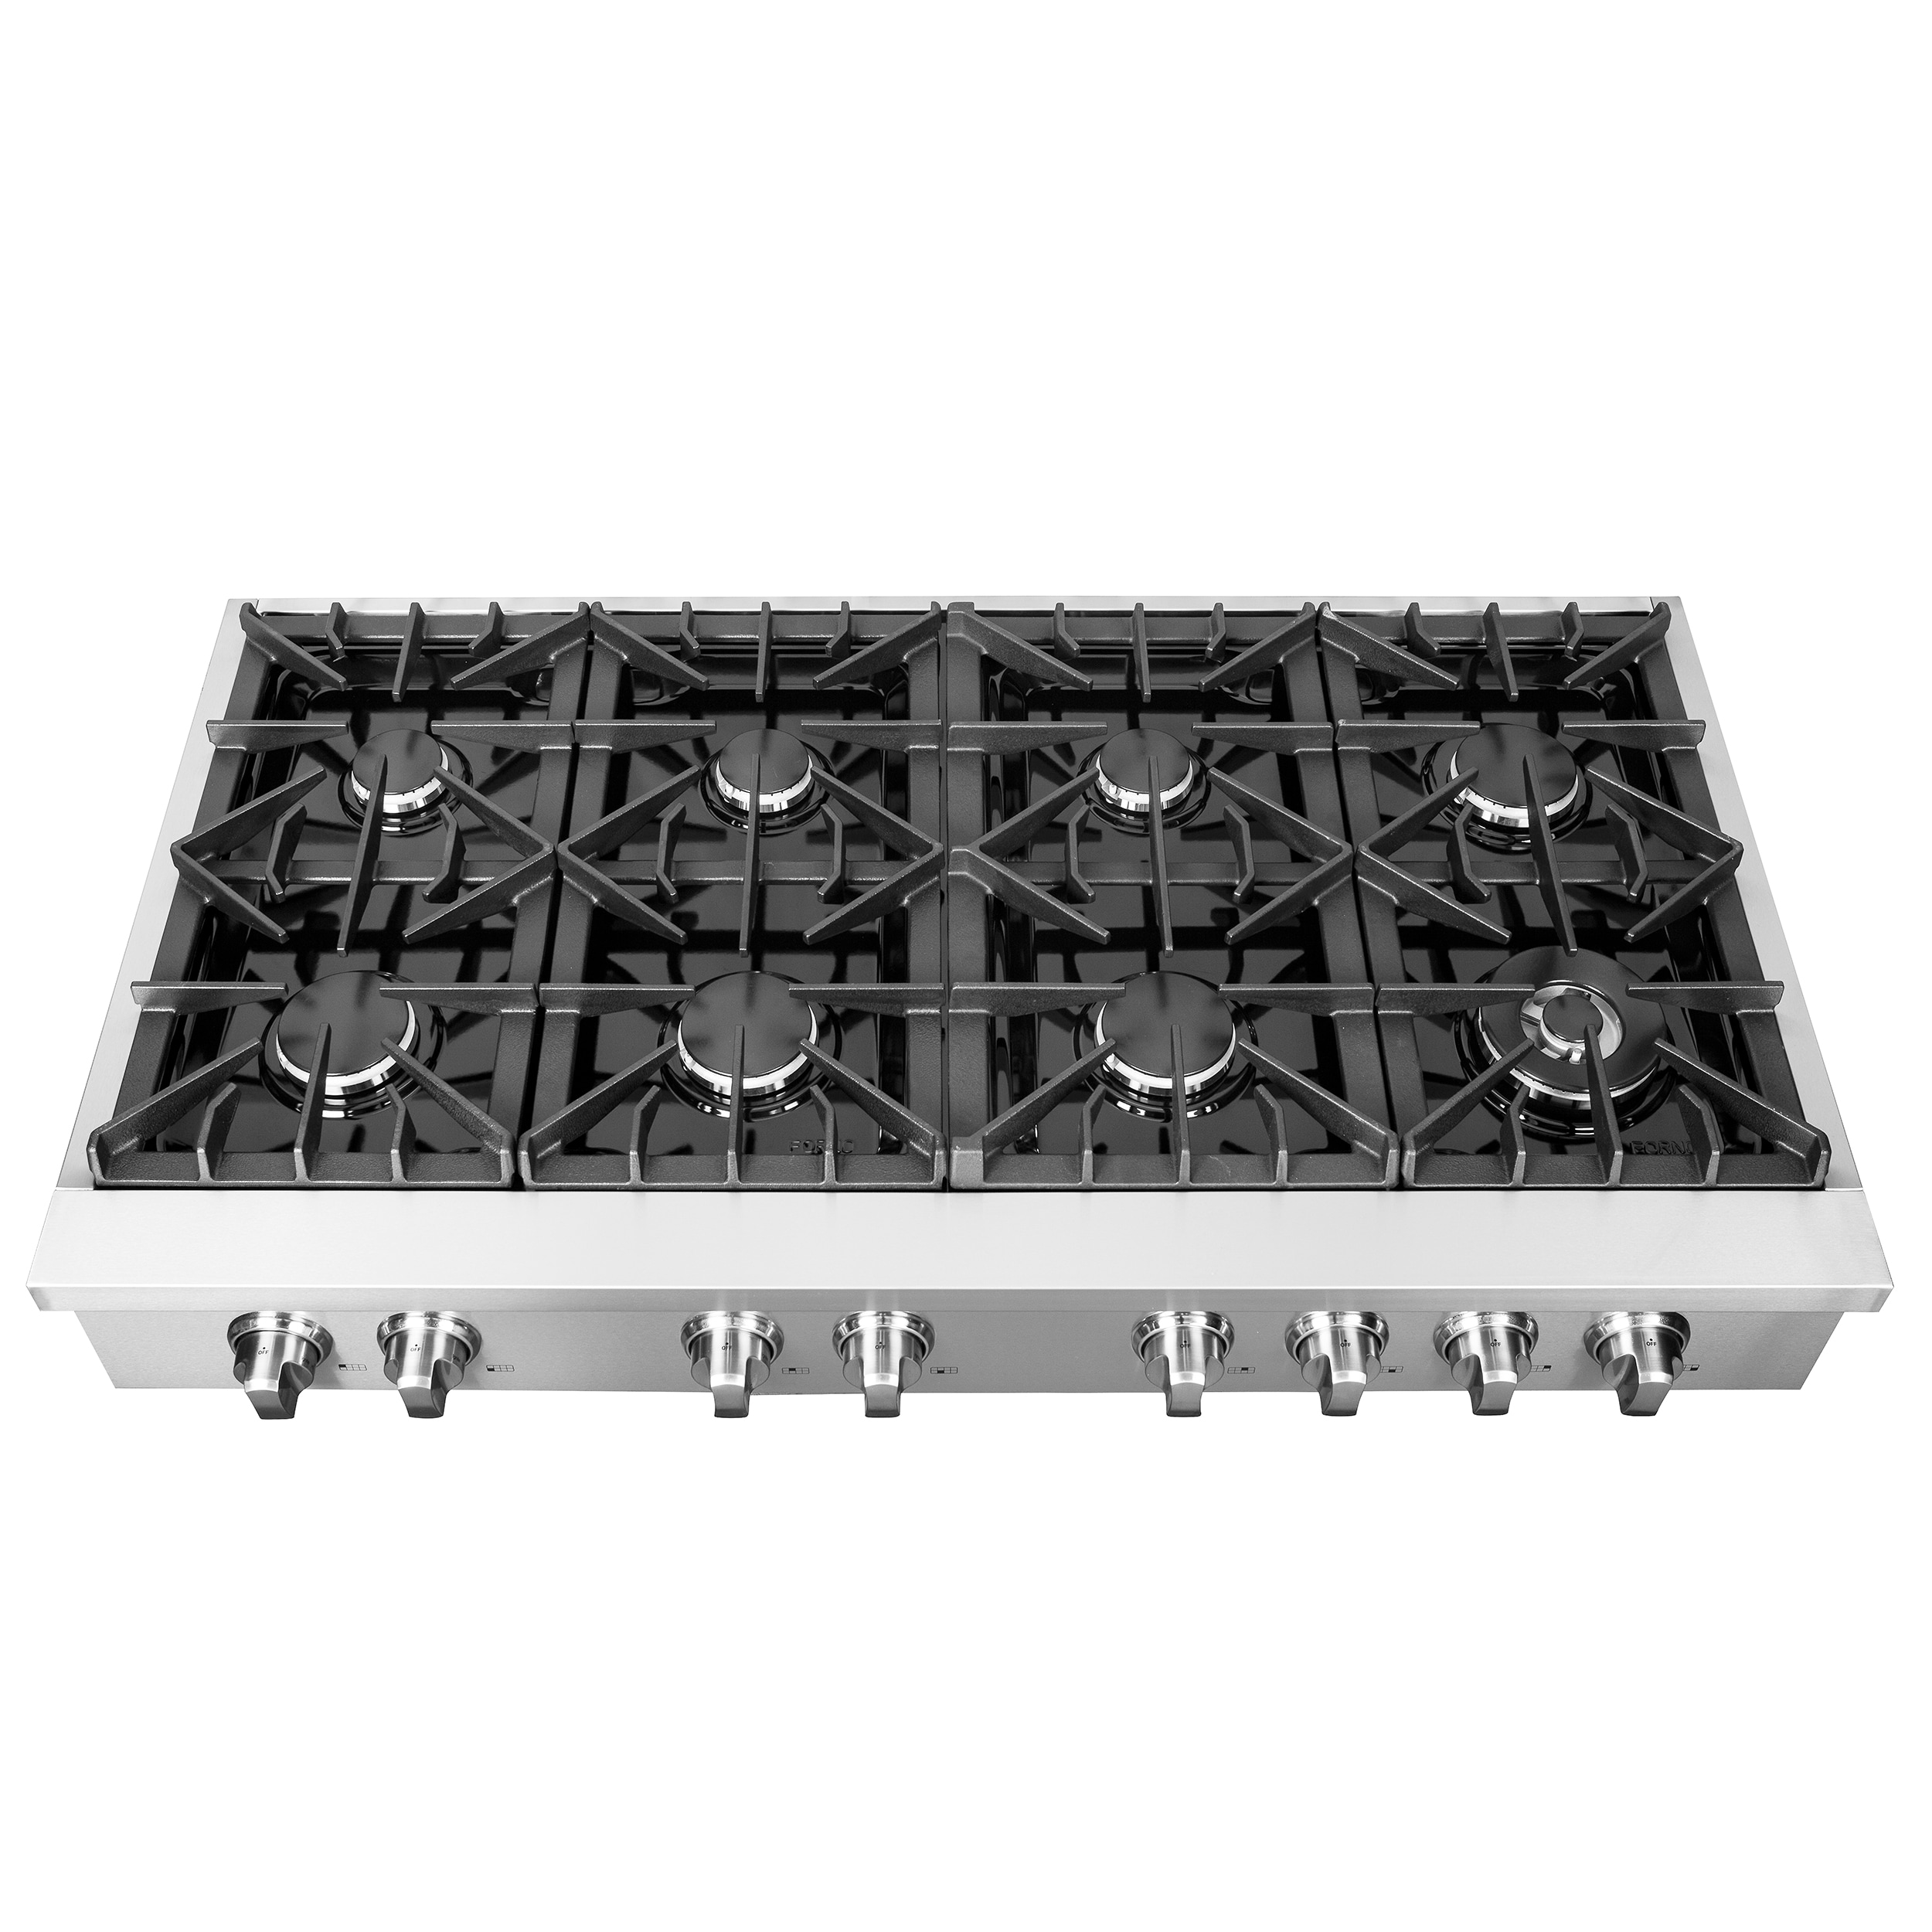 FORNO Alta Qualita 48-in 8 Burners Stainless Steel Gas Cooktop in 